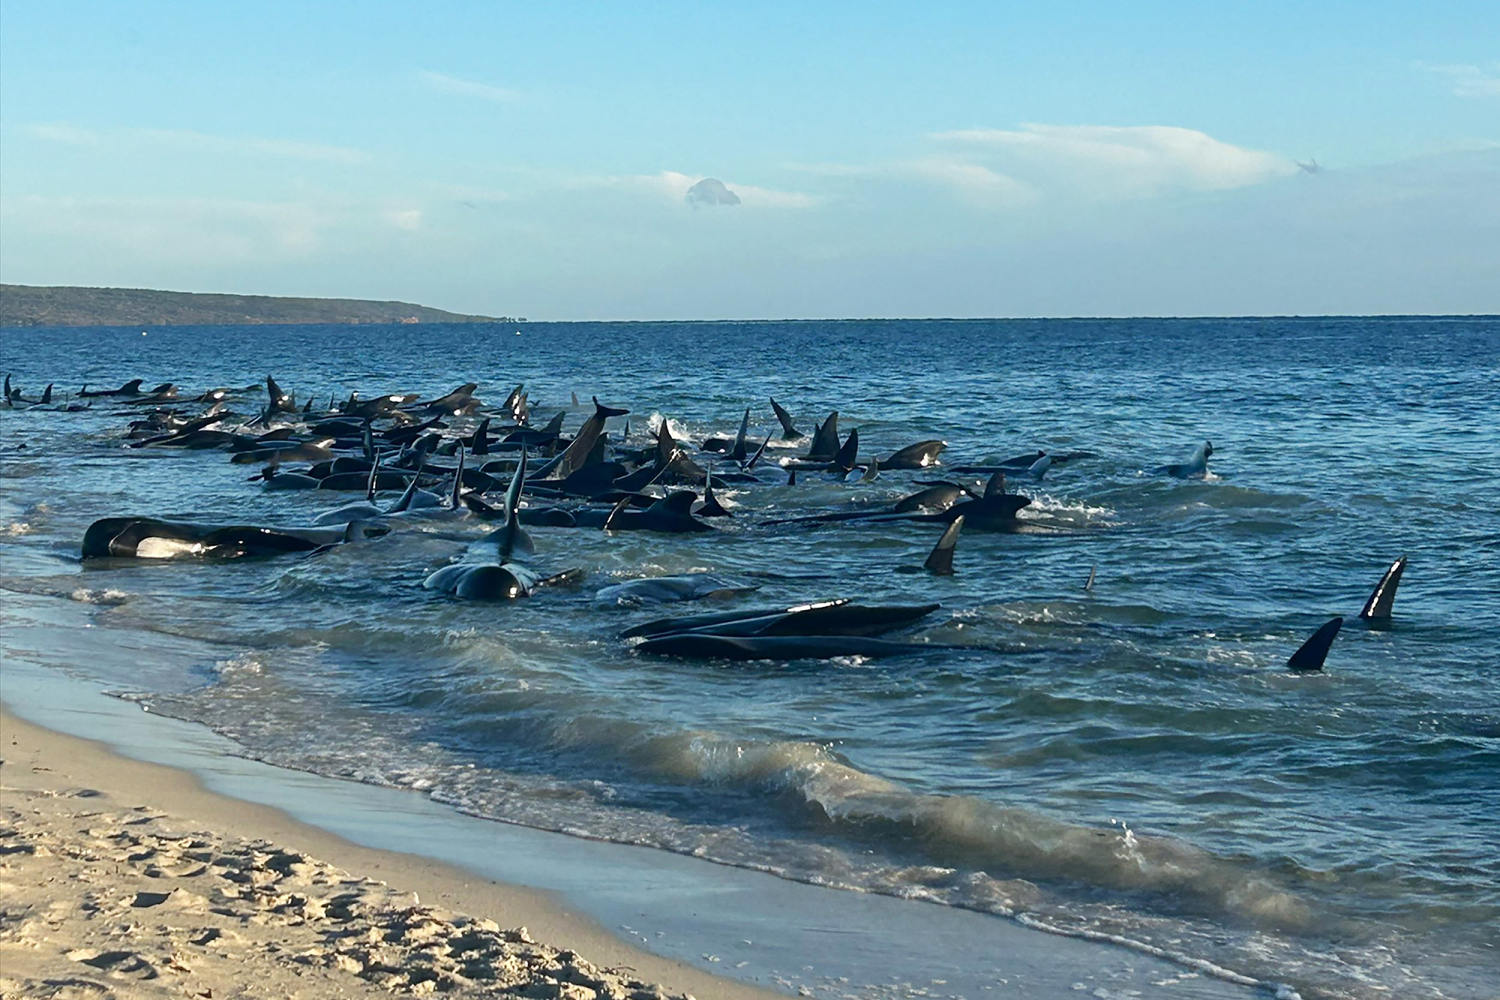 More than 100 pilot whales are rescued after being stranded in Western Australia